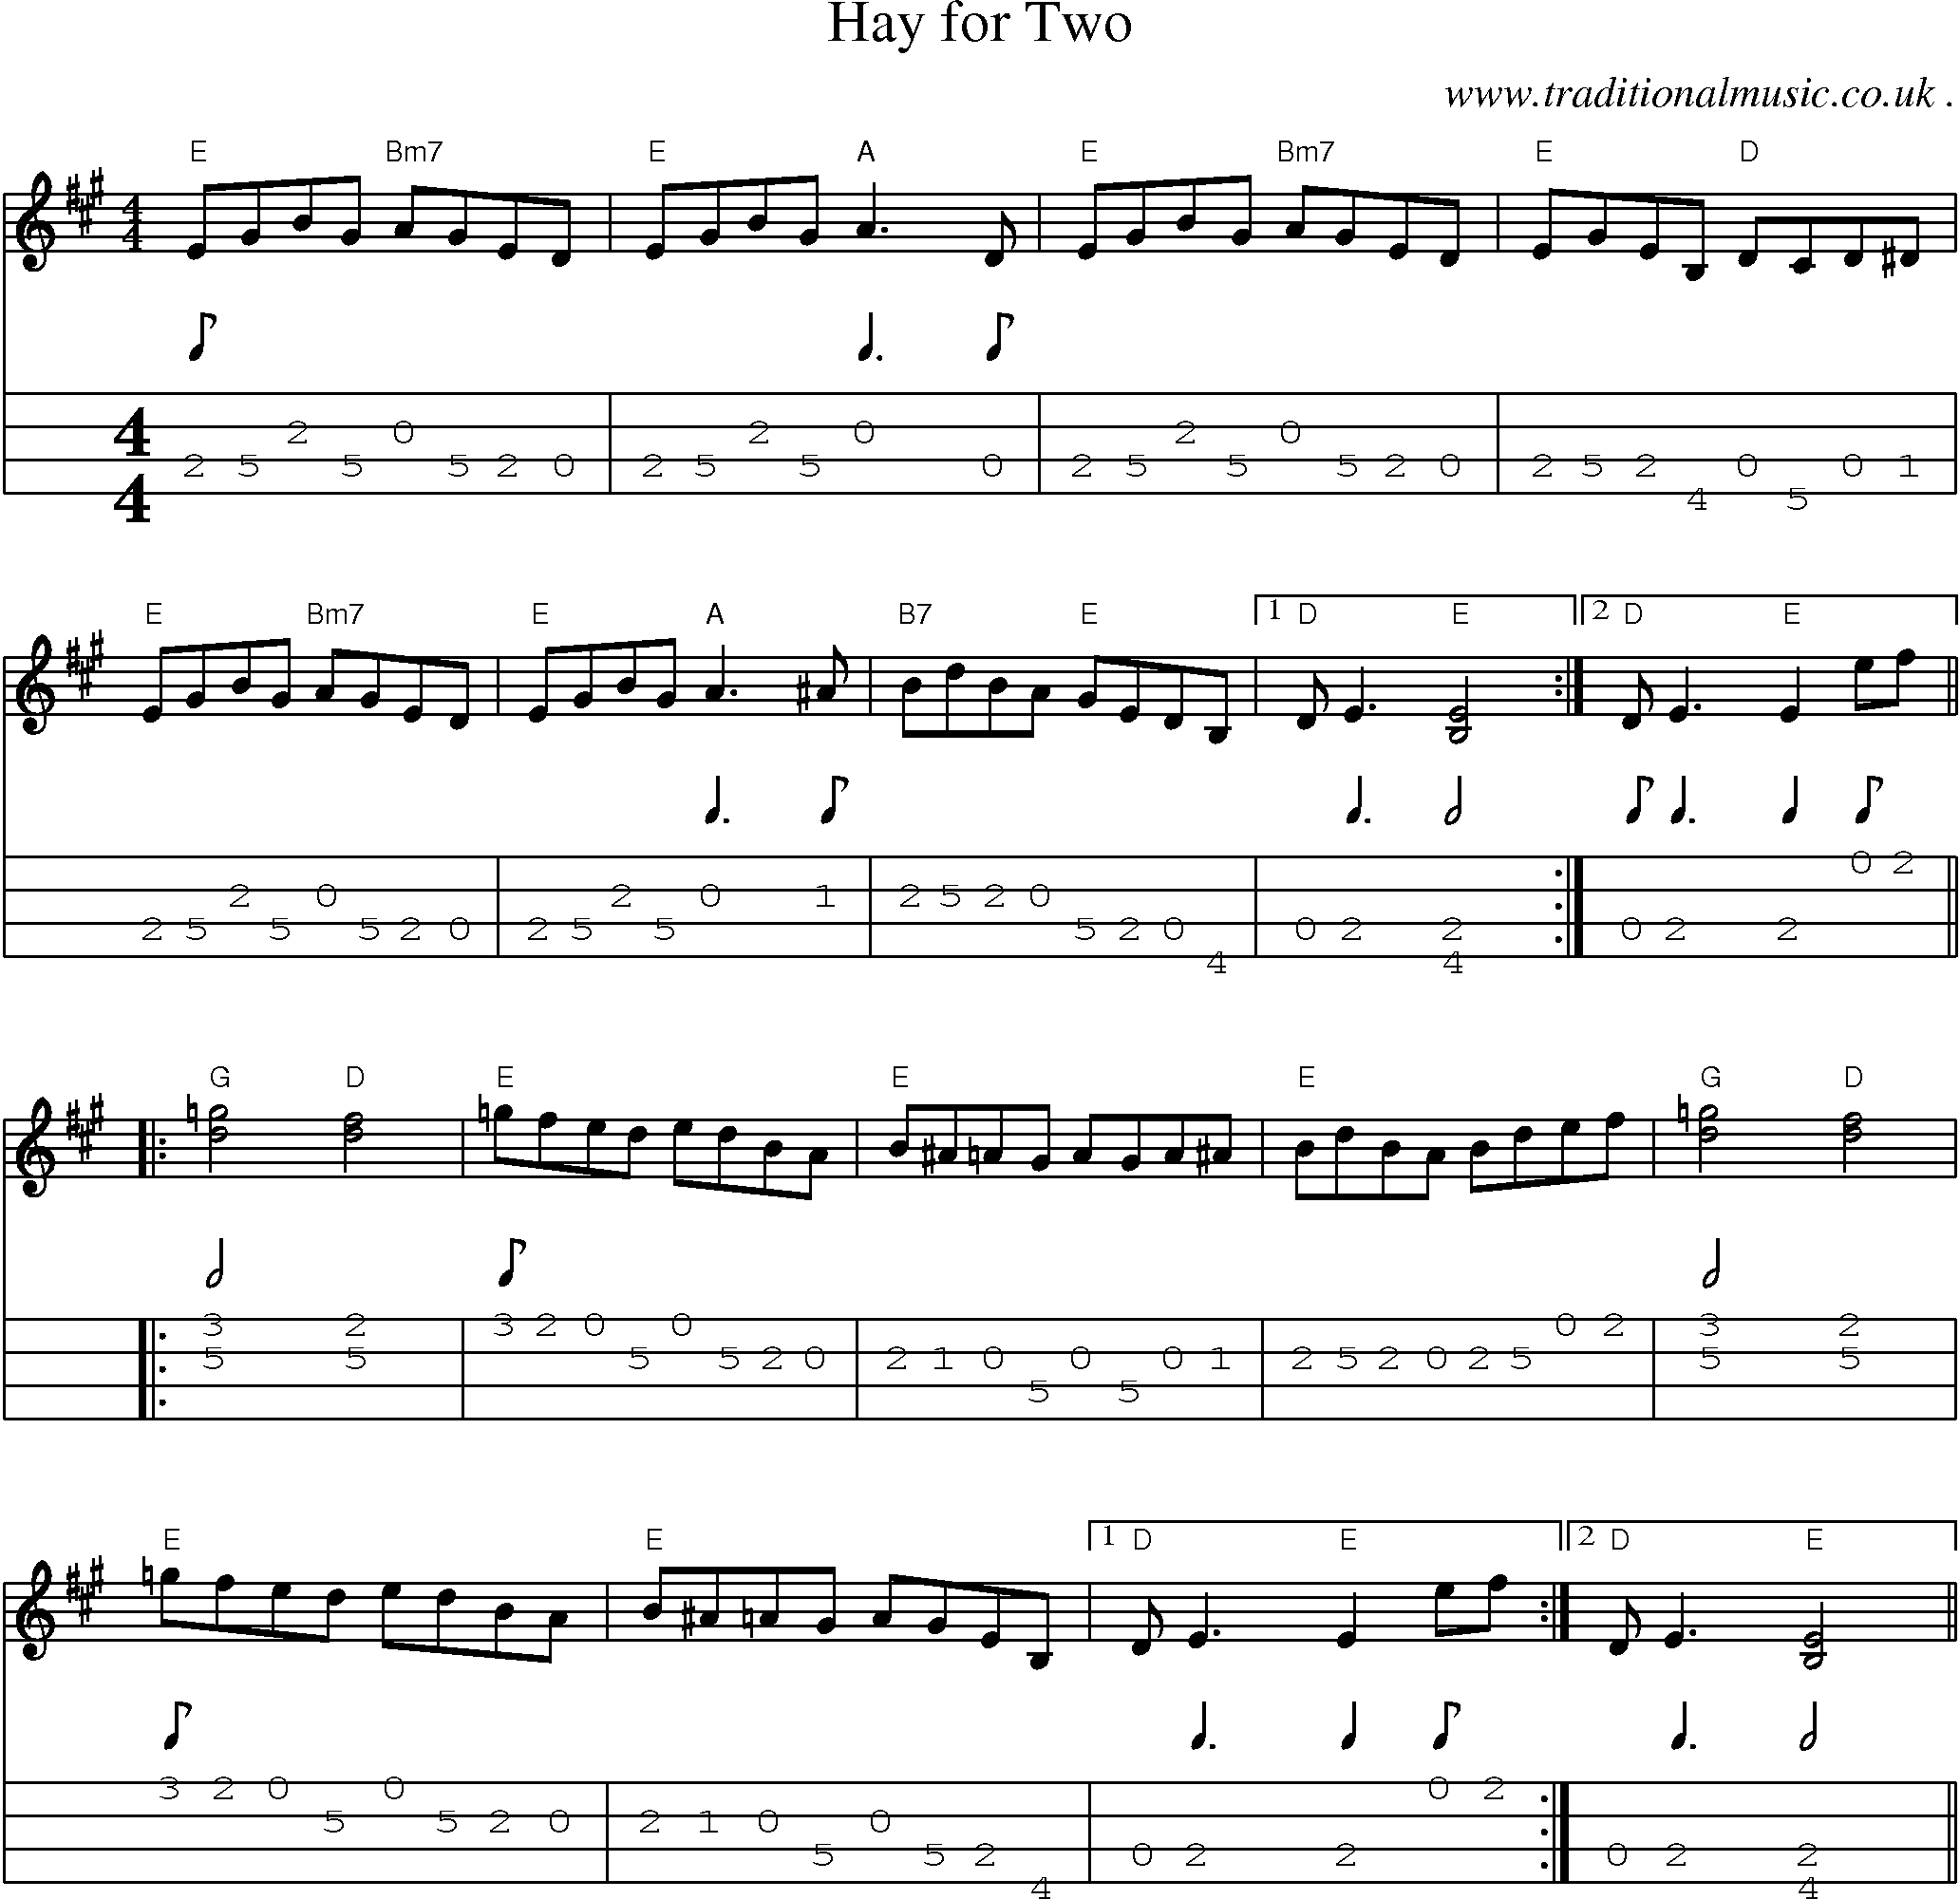 Music Score and Guitar Tabs for Hay For Two